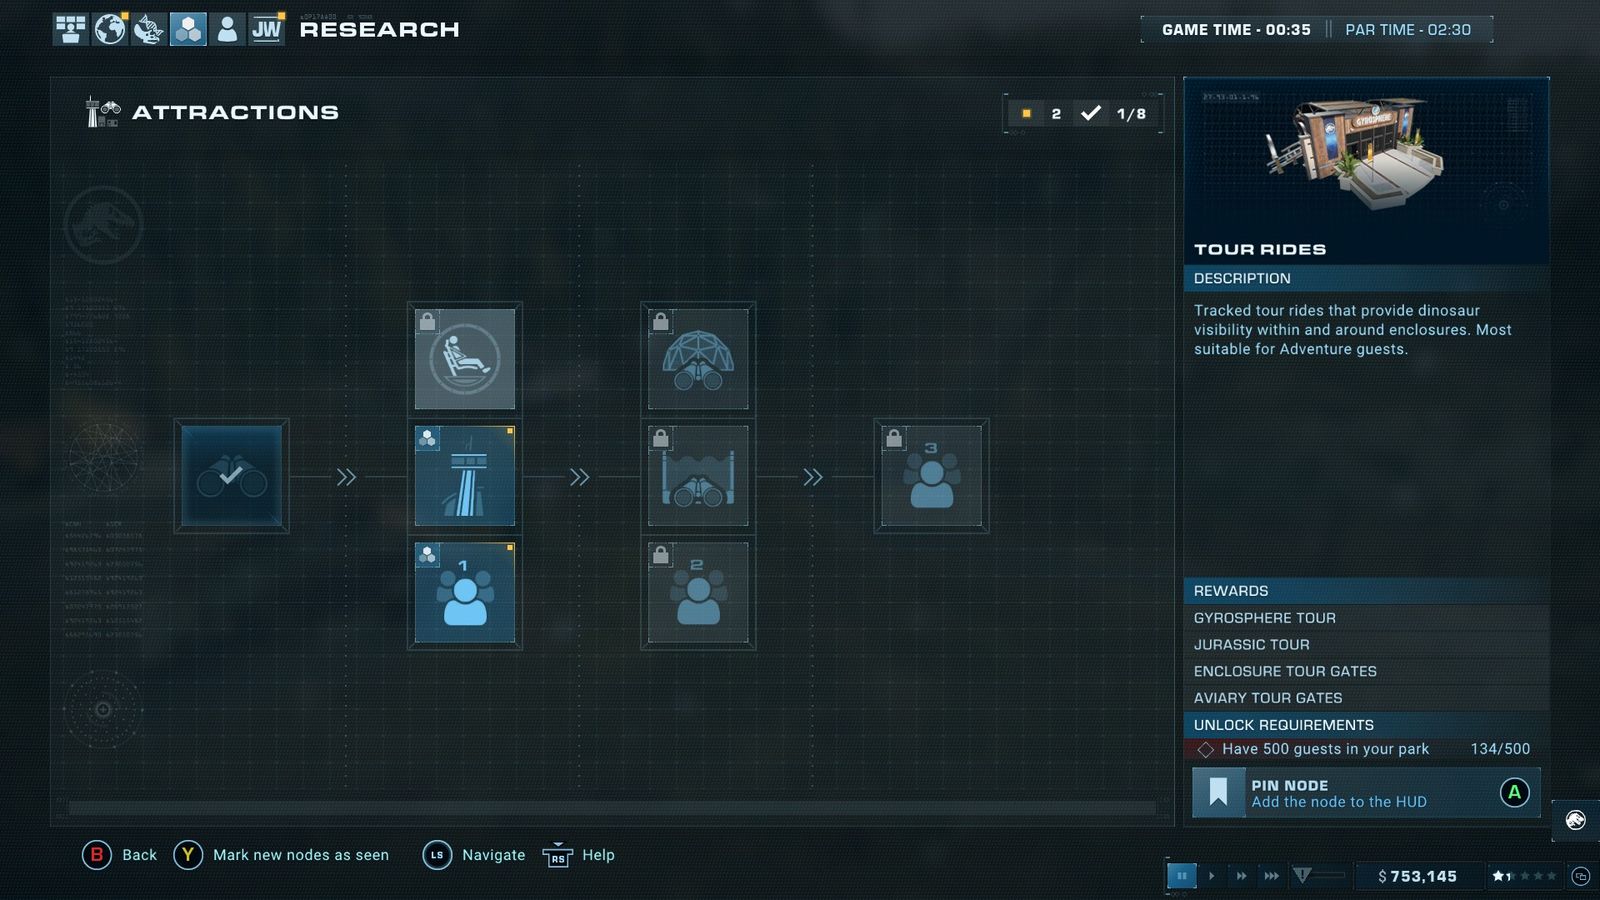 The tour rides research screen in Jurassic World Evolution 2. The research is still locked as the 500 guest requirement has not been filled. The screen shows the tour ride research unlocks 4 different tour-based items. 